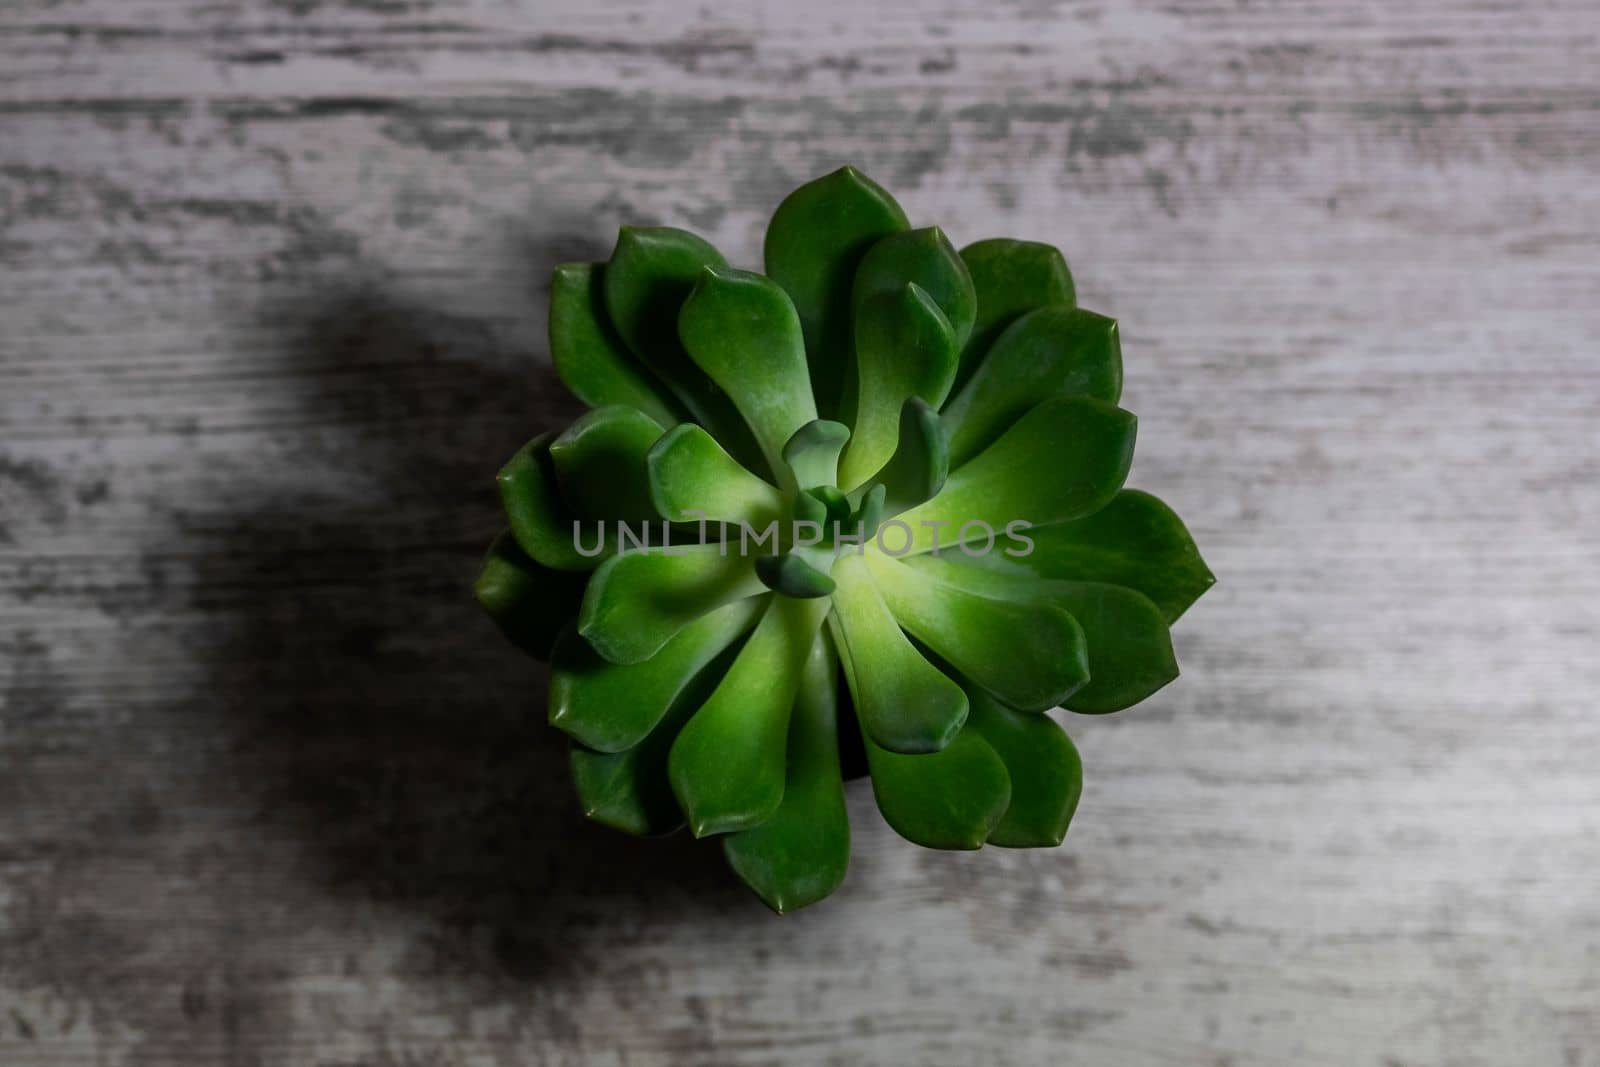 Succulent flower close-up on a wooden background. Potted plant for advertising design, blogging, printing. High quality photo